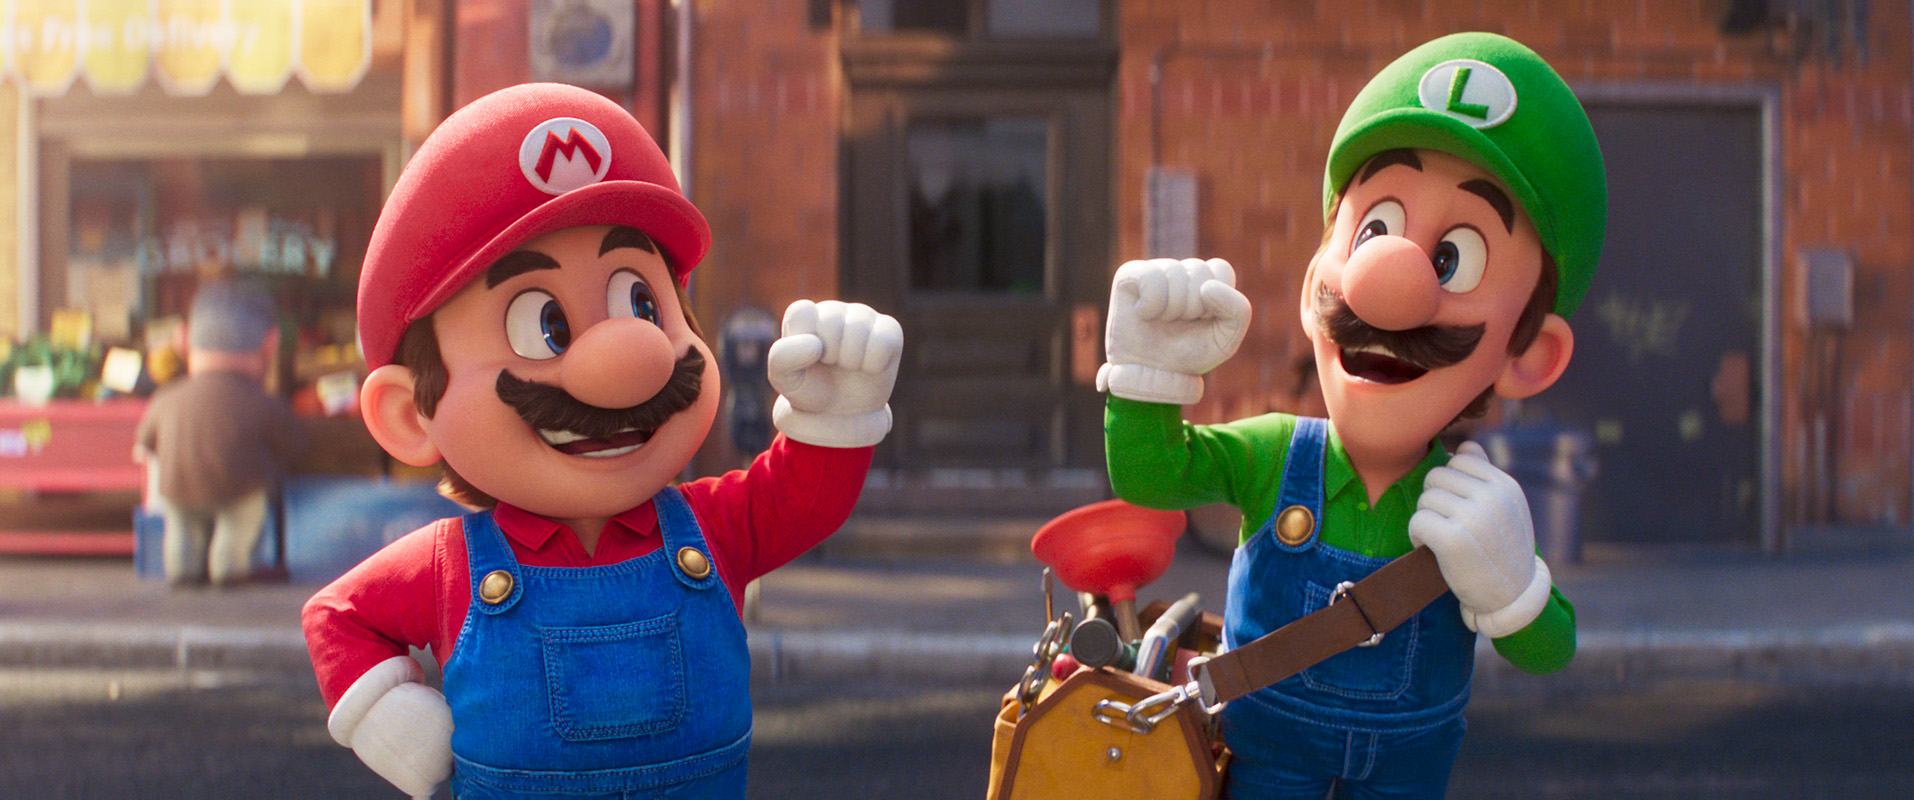 The Super Mario Bros. Movie Drops New Image And Character Posters! of the Force